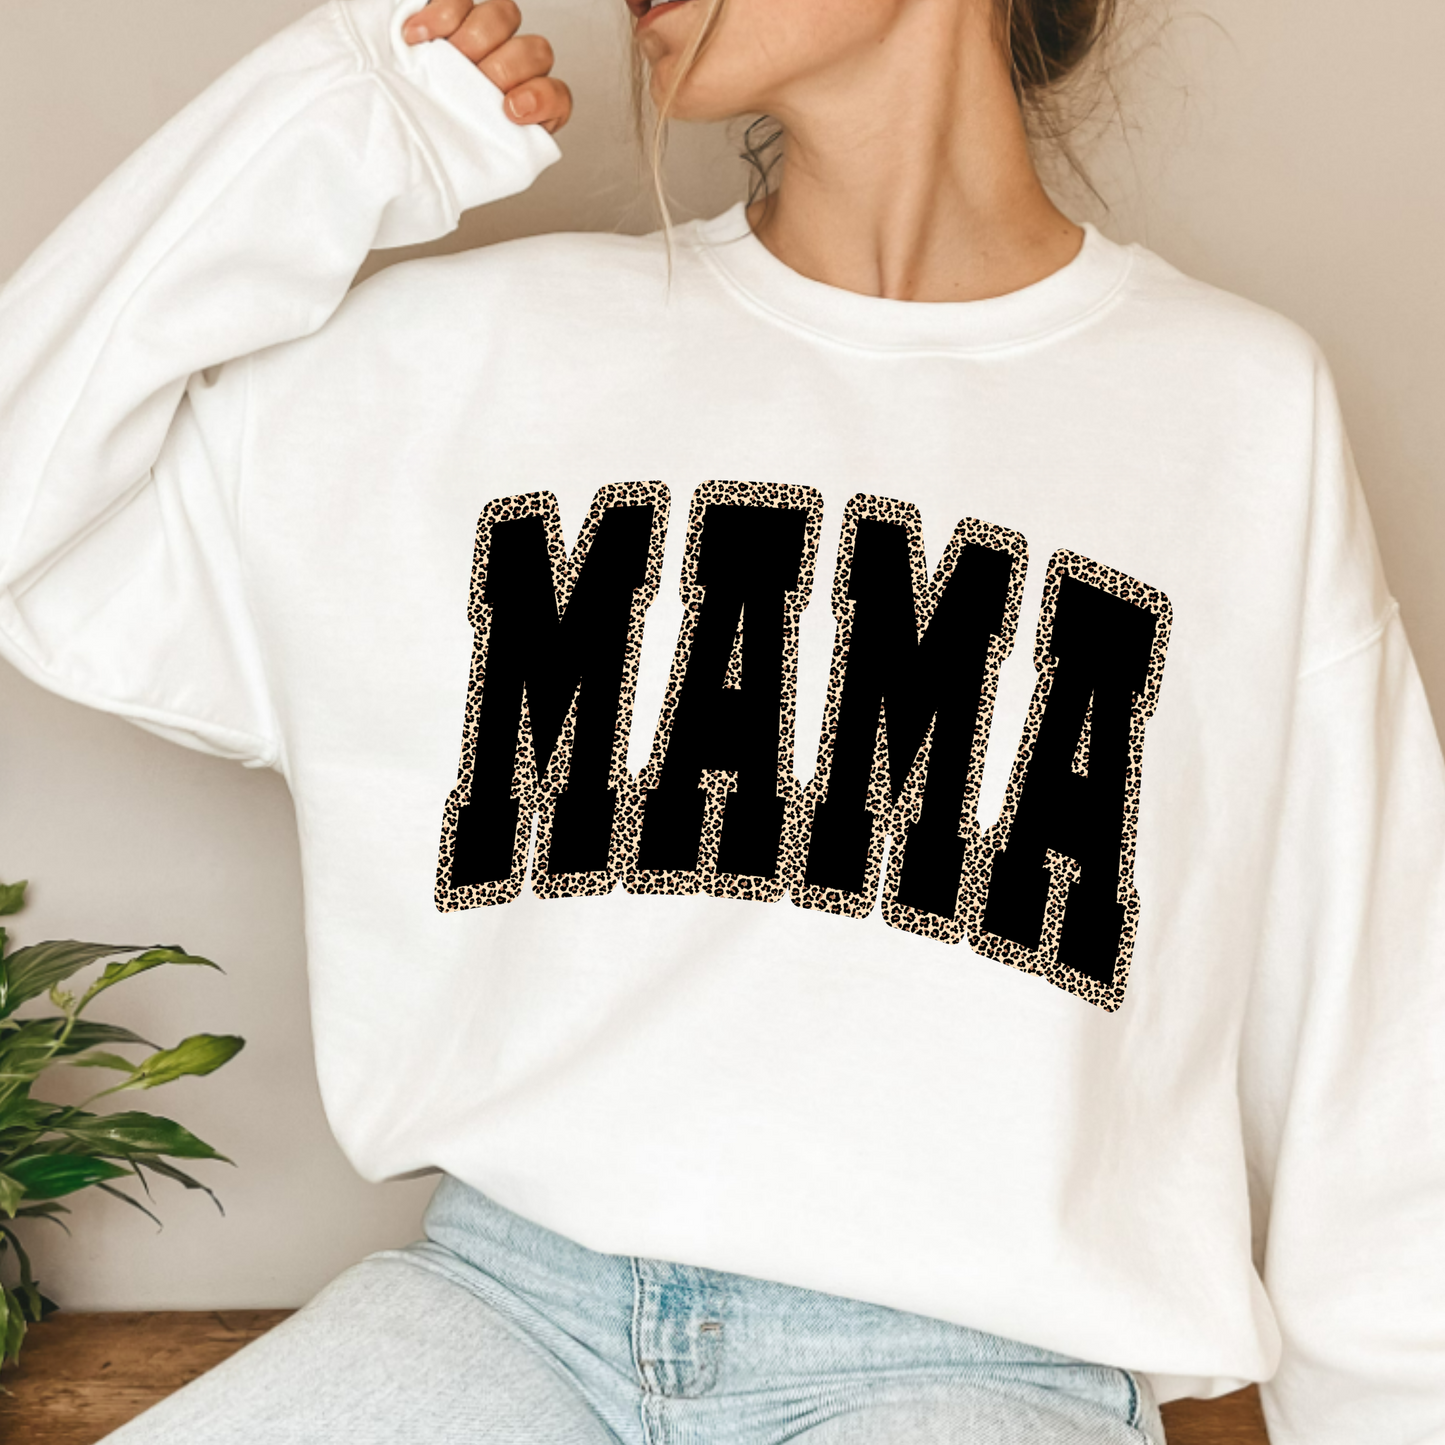 (Shirt Not Included) MAMA in Black or White & Animal Print -  Clear Film Transfer